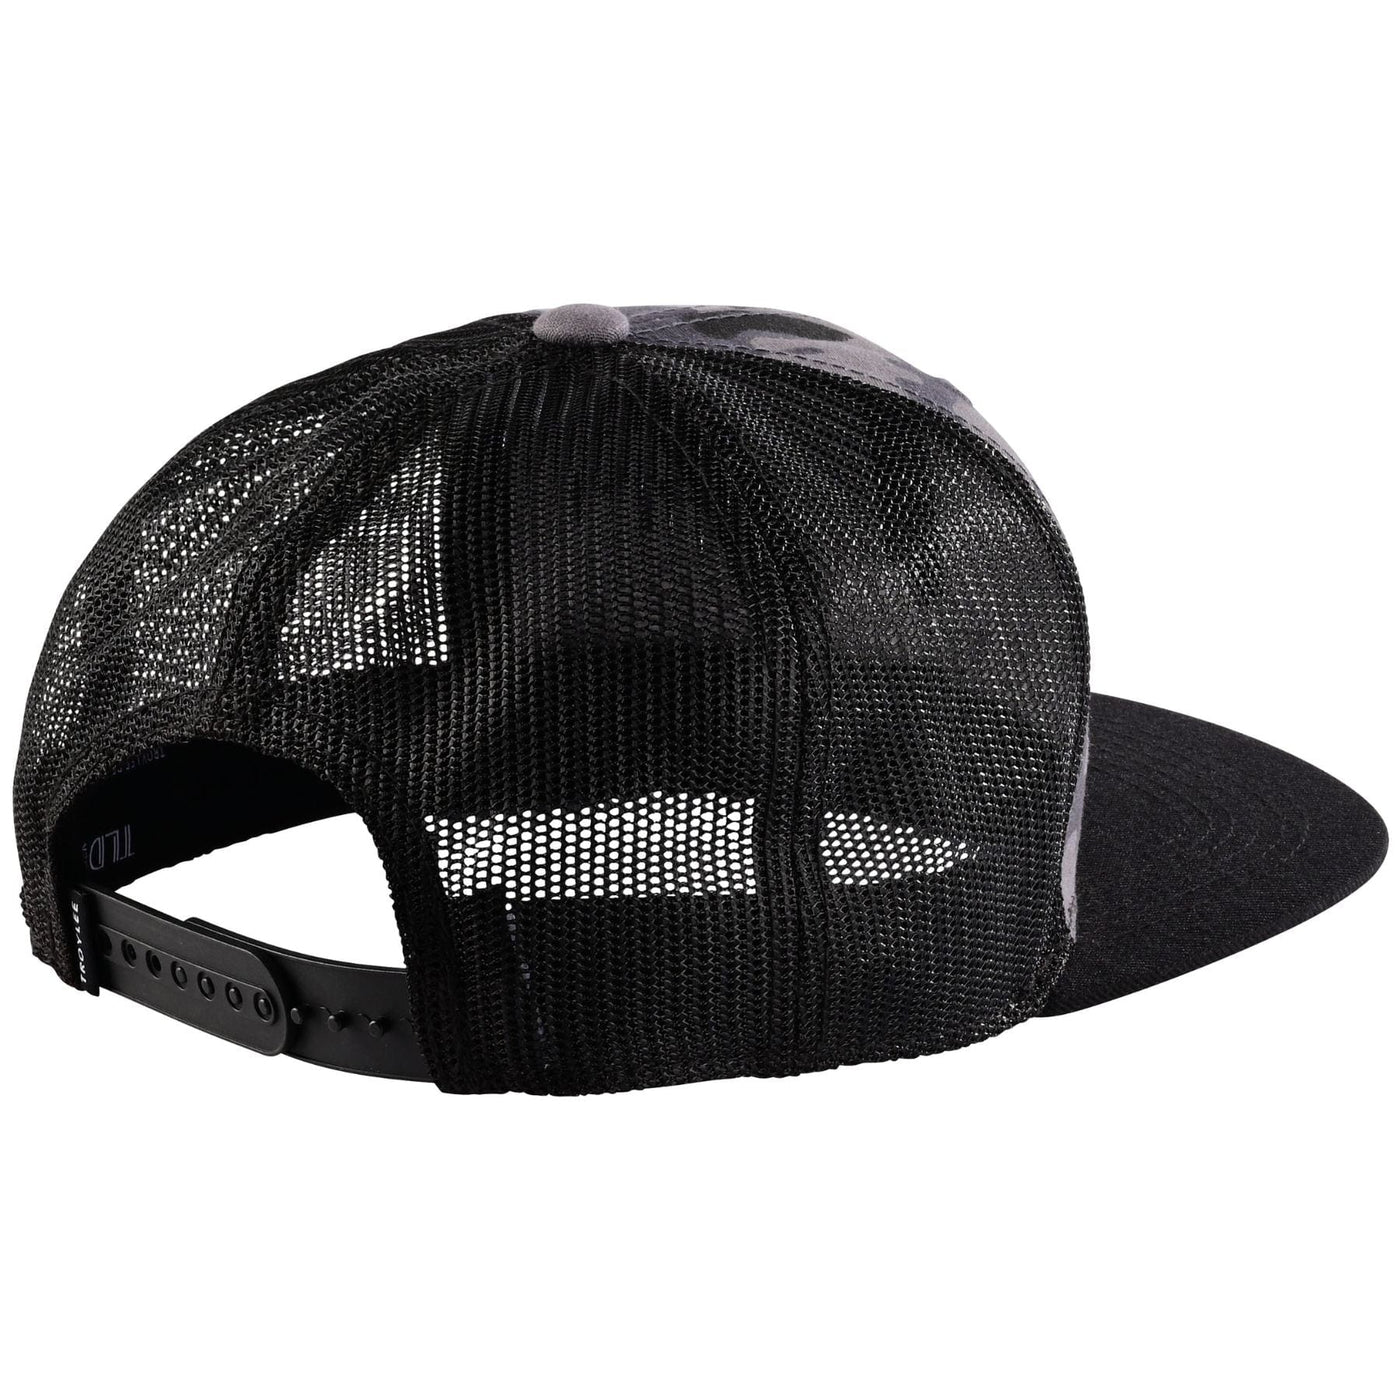 Troy Lee Designs 9FIFTY Signature Snapback Hat - Camo Black/Silver 8Lines Shop - Fast Shipping